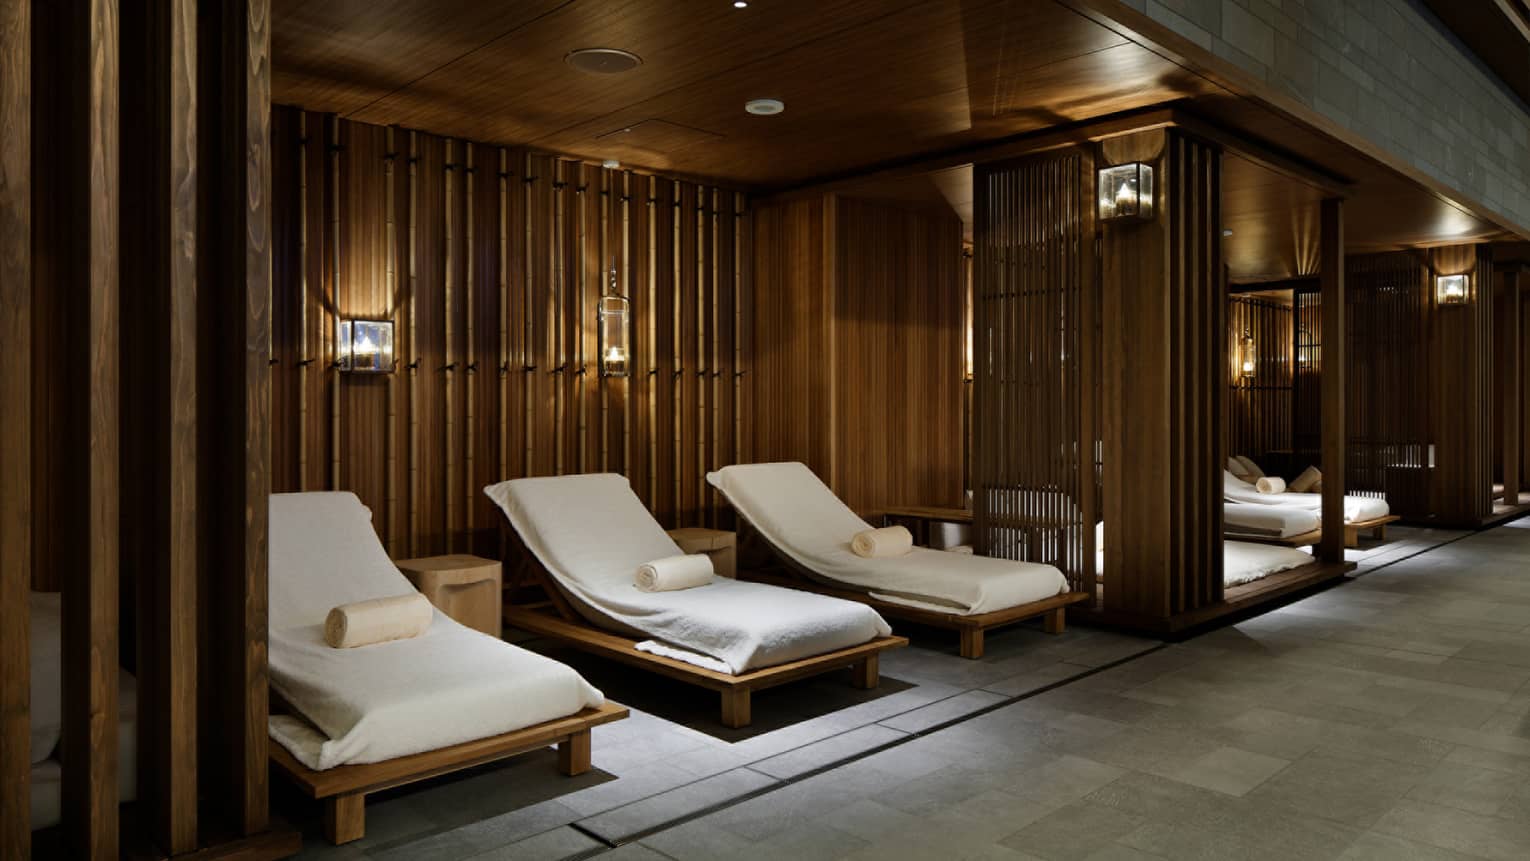 Lounge chairs with white towels under wood walls in spa